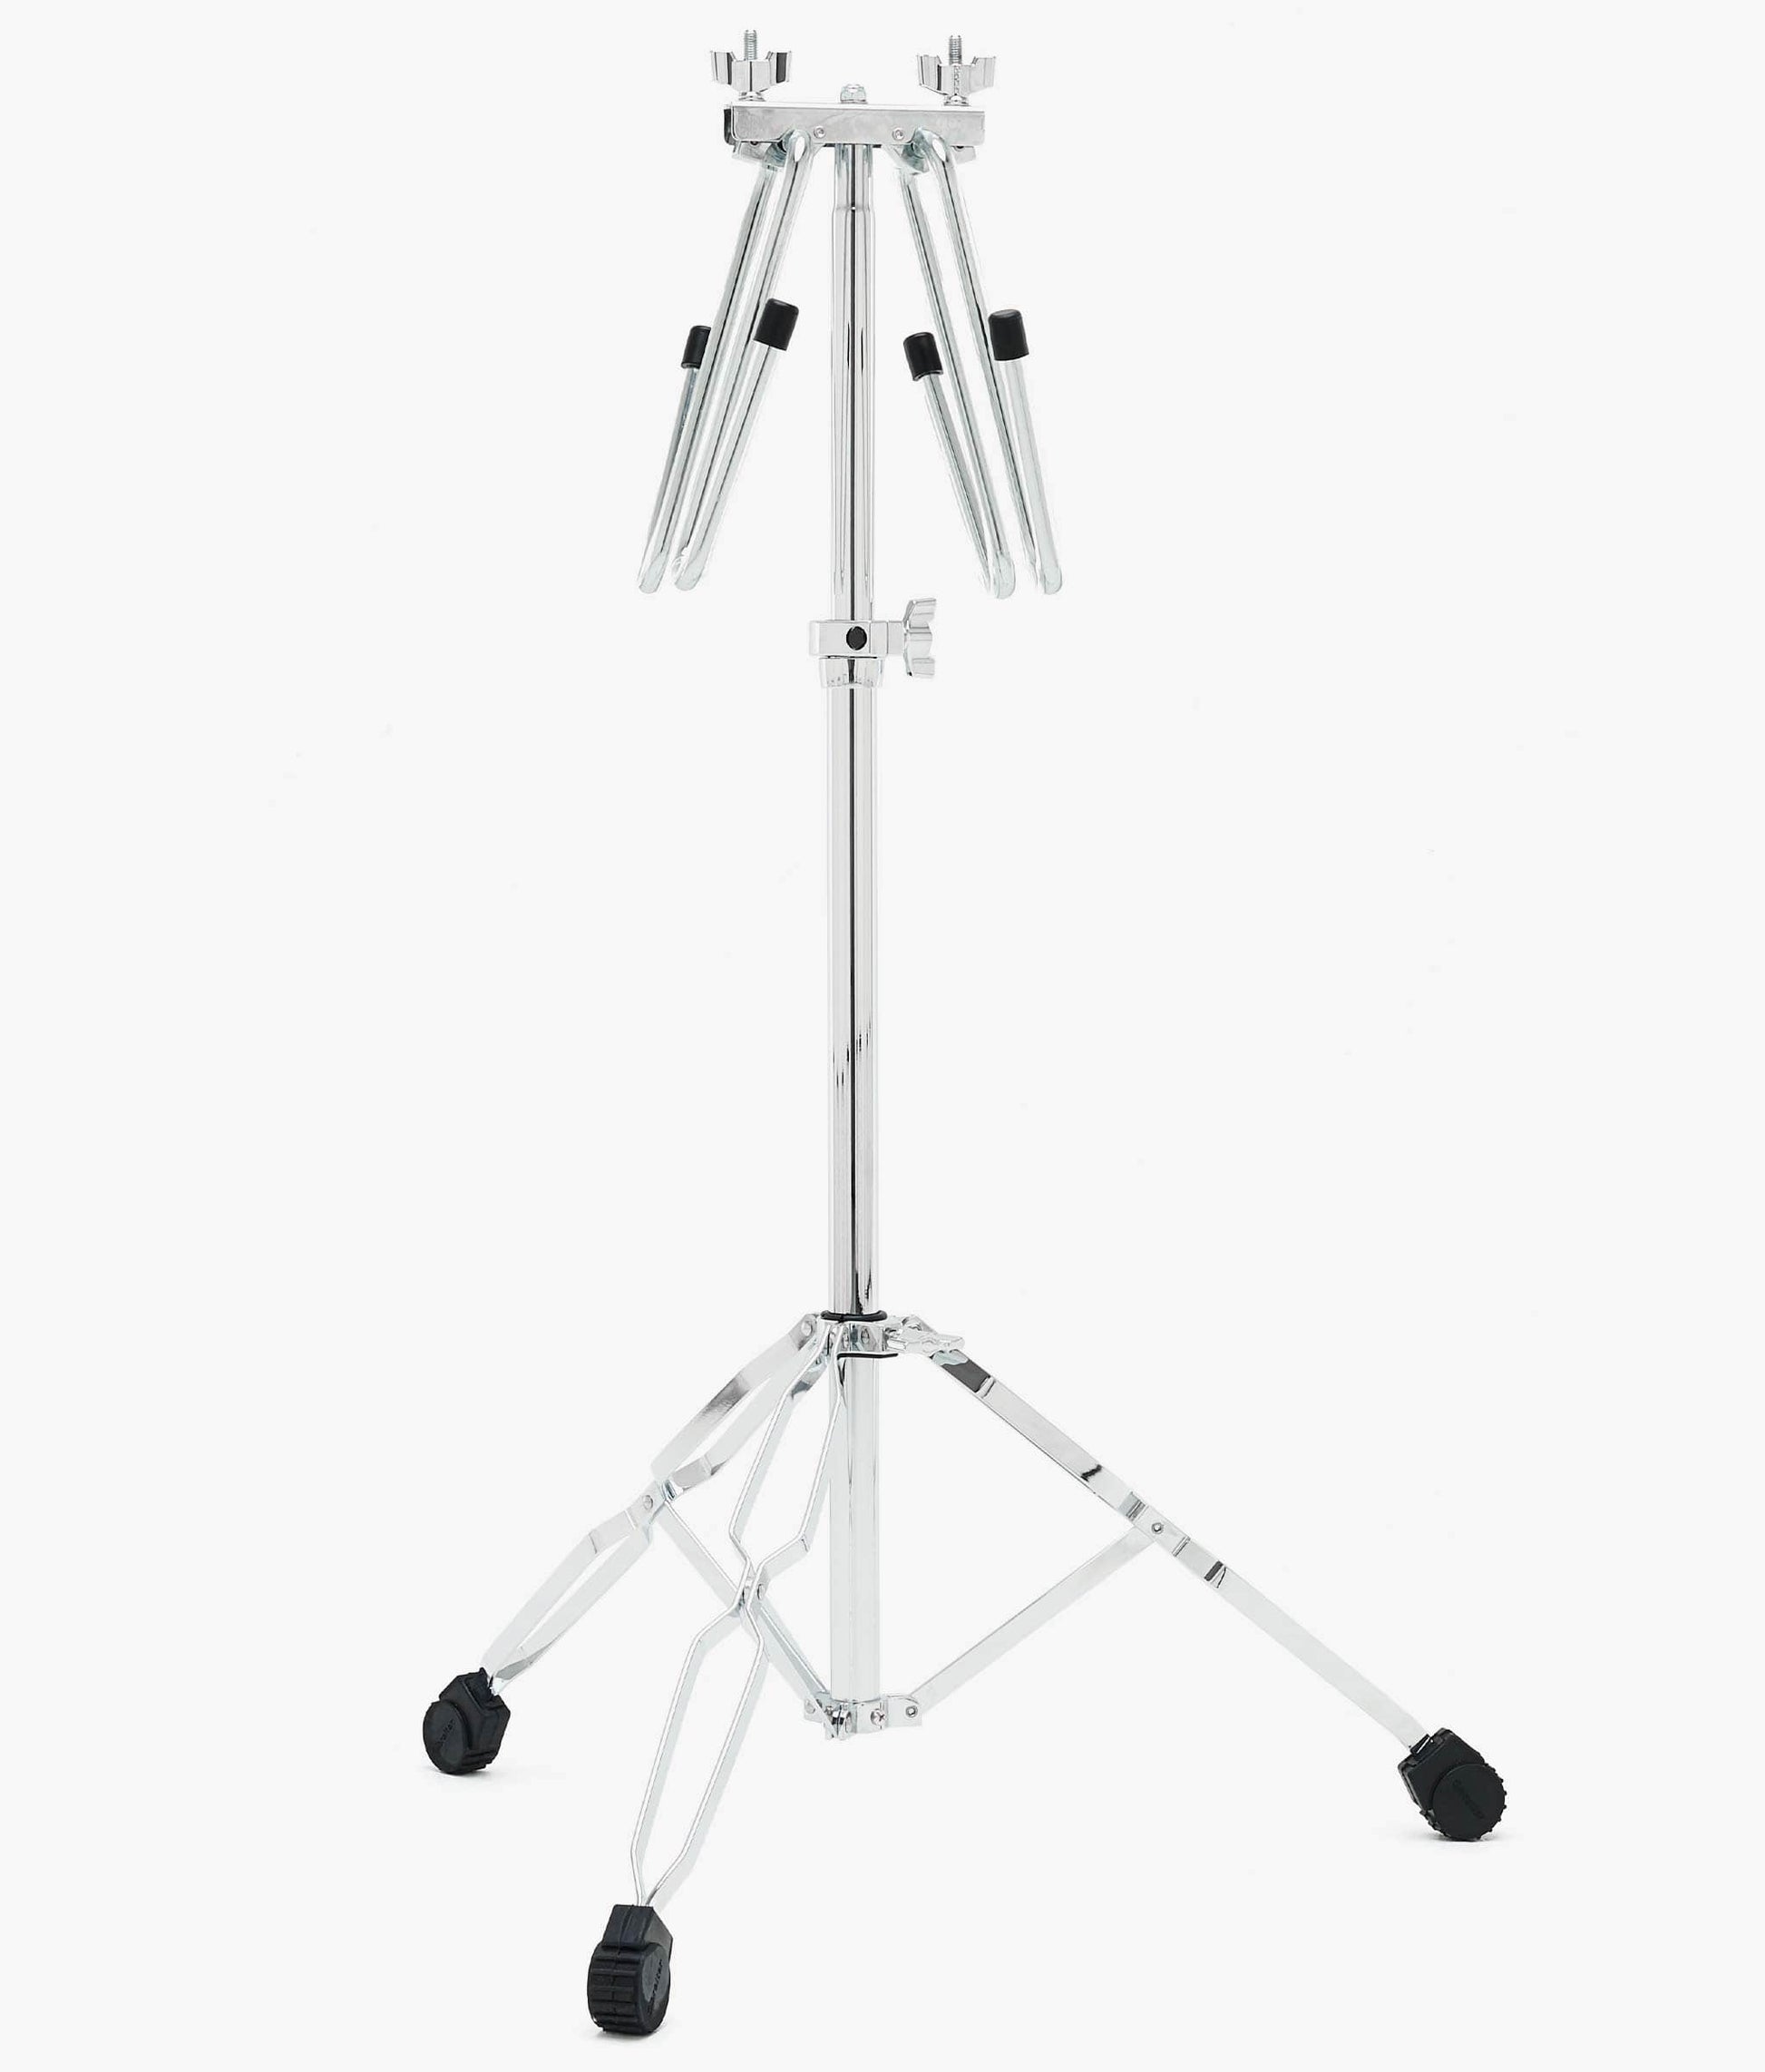  Gibraltar 7614 Concert Cymbal Stand concert cymbal stand